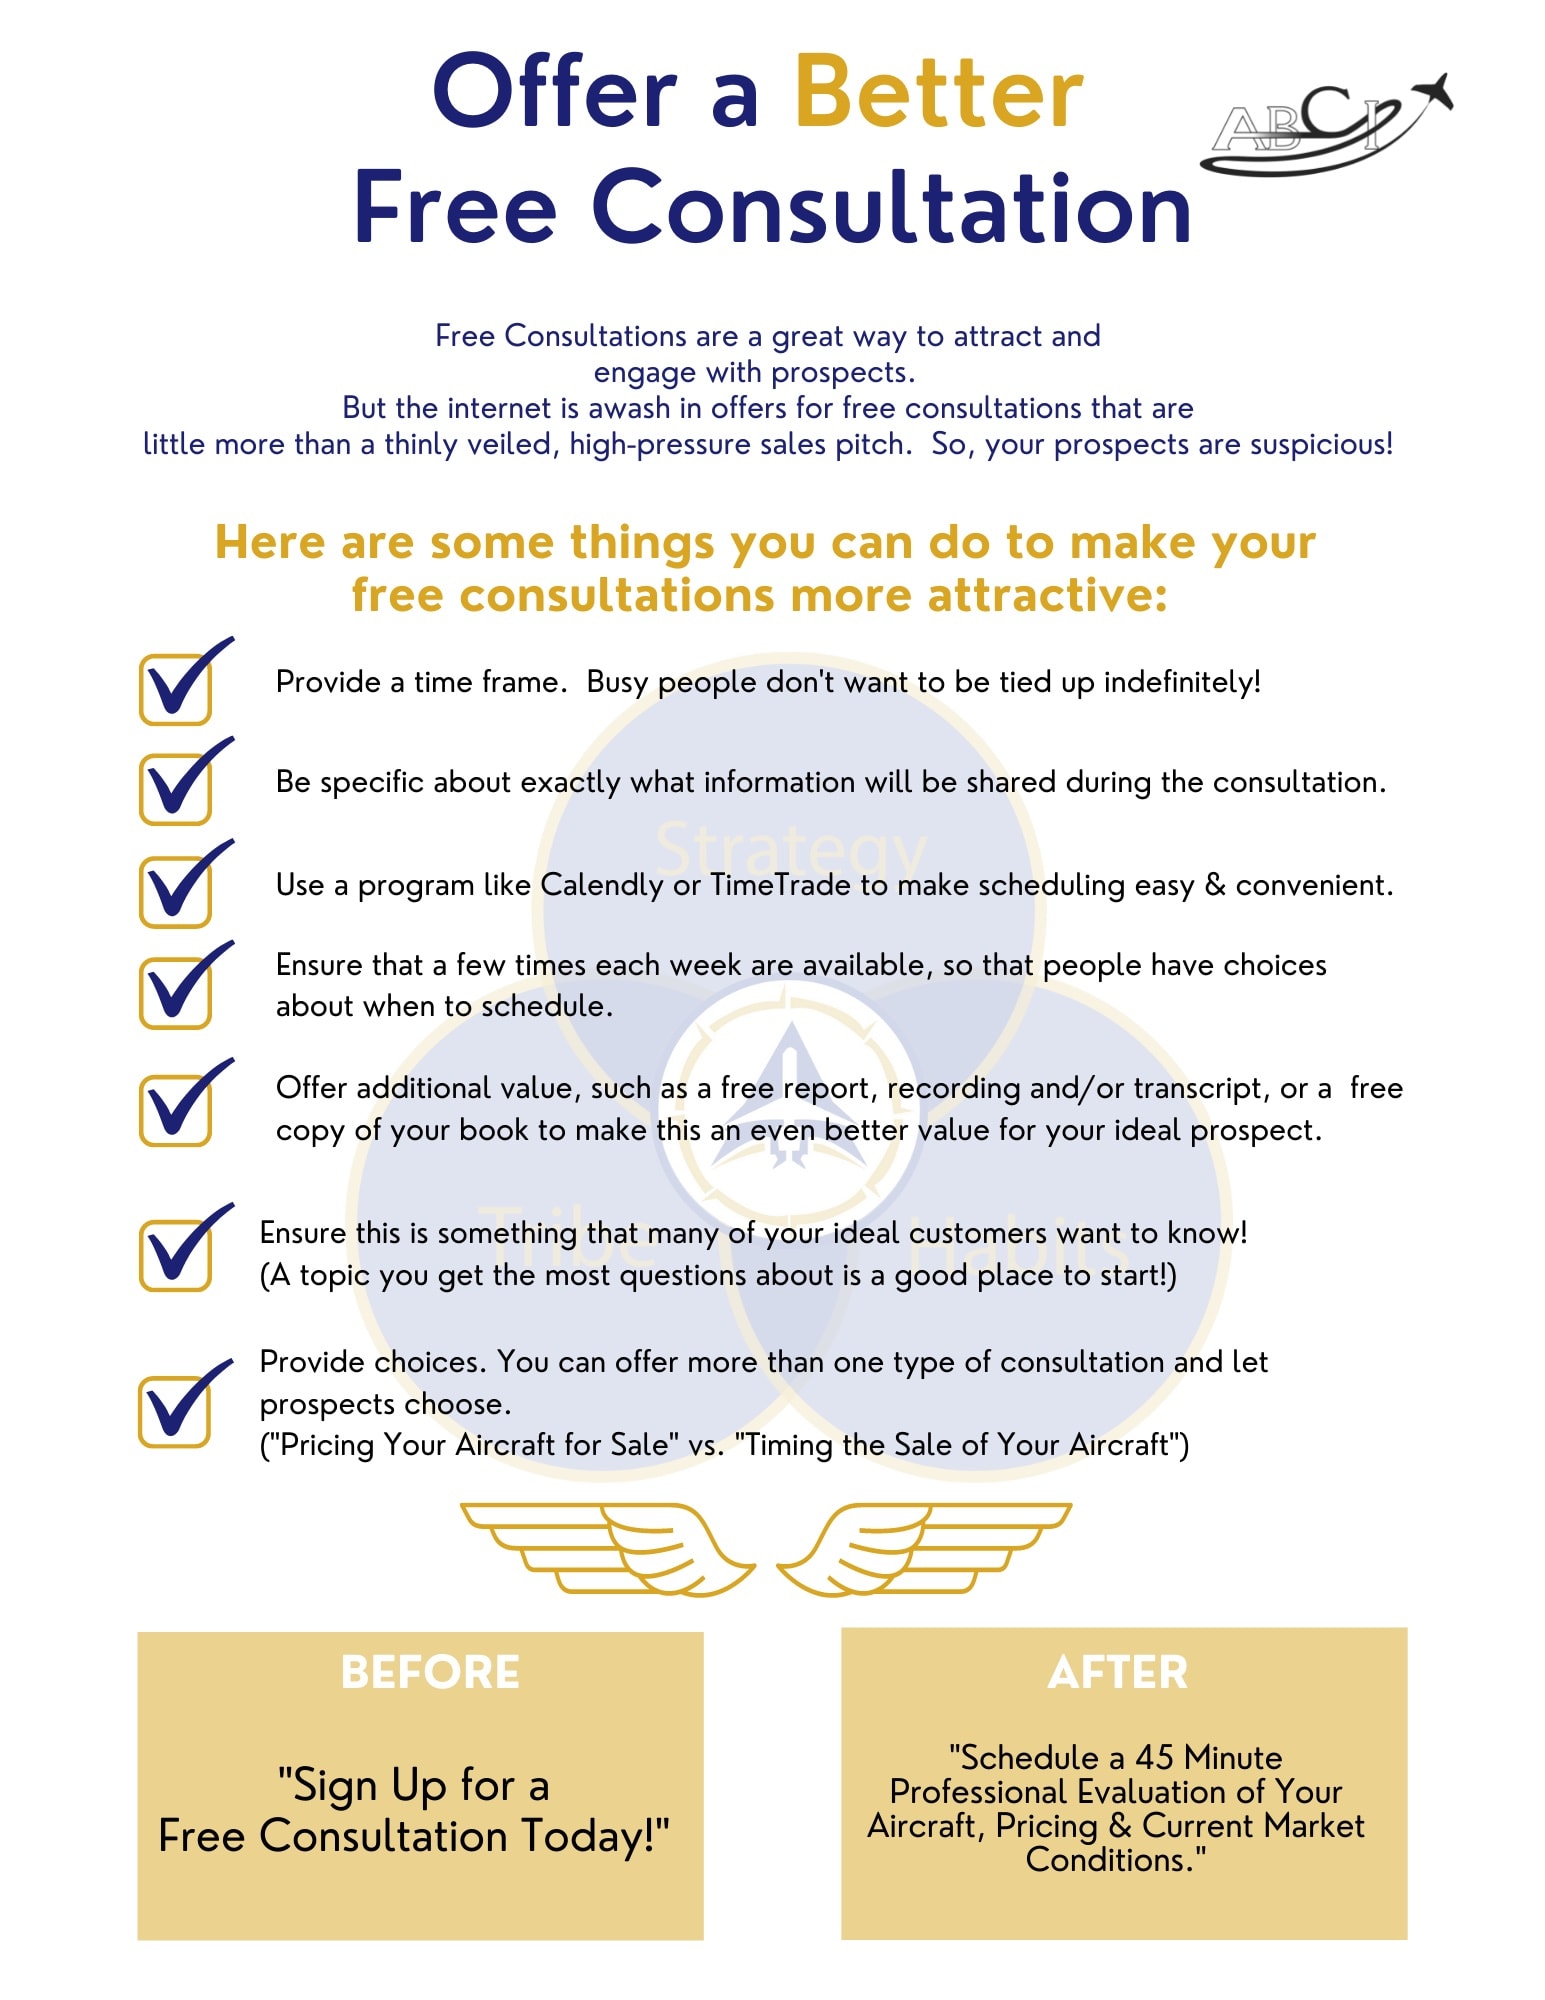 Offer a Better Free Consultation